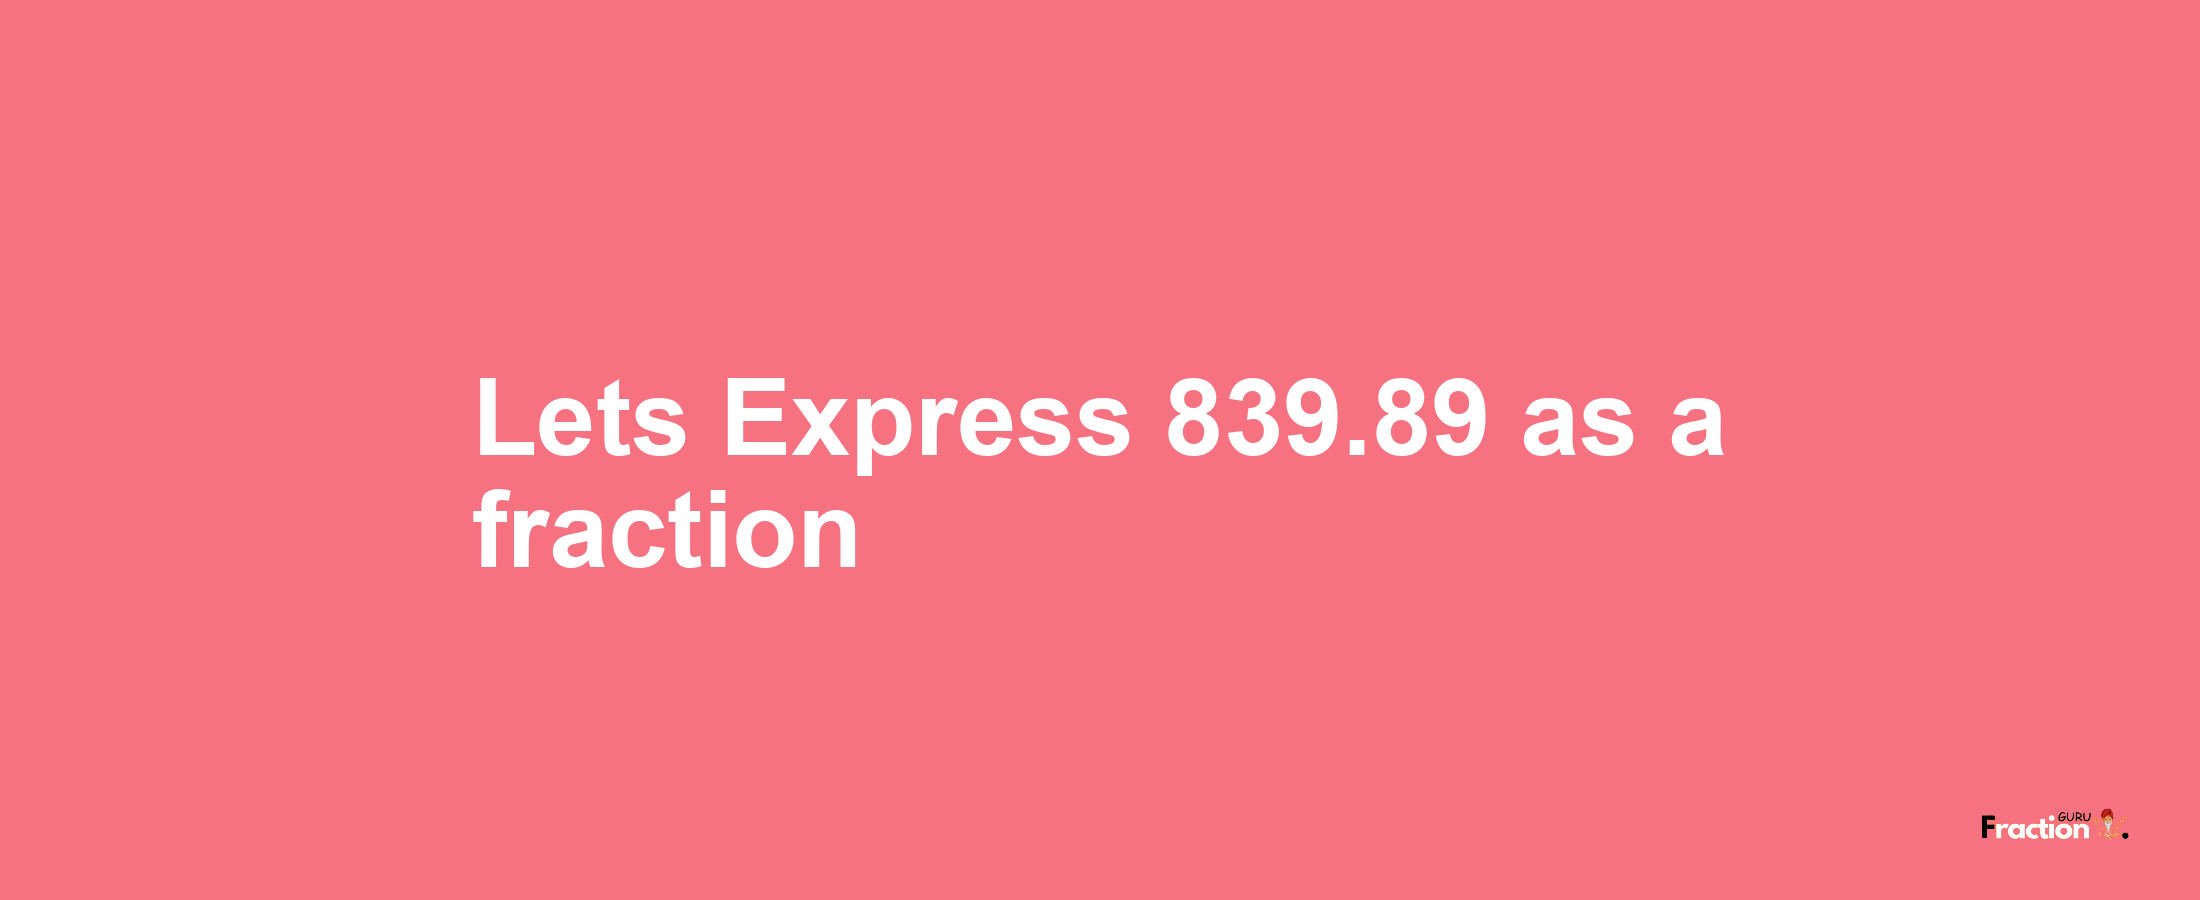 Lets Express 839.89 as afraction